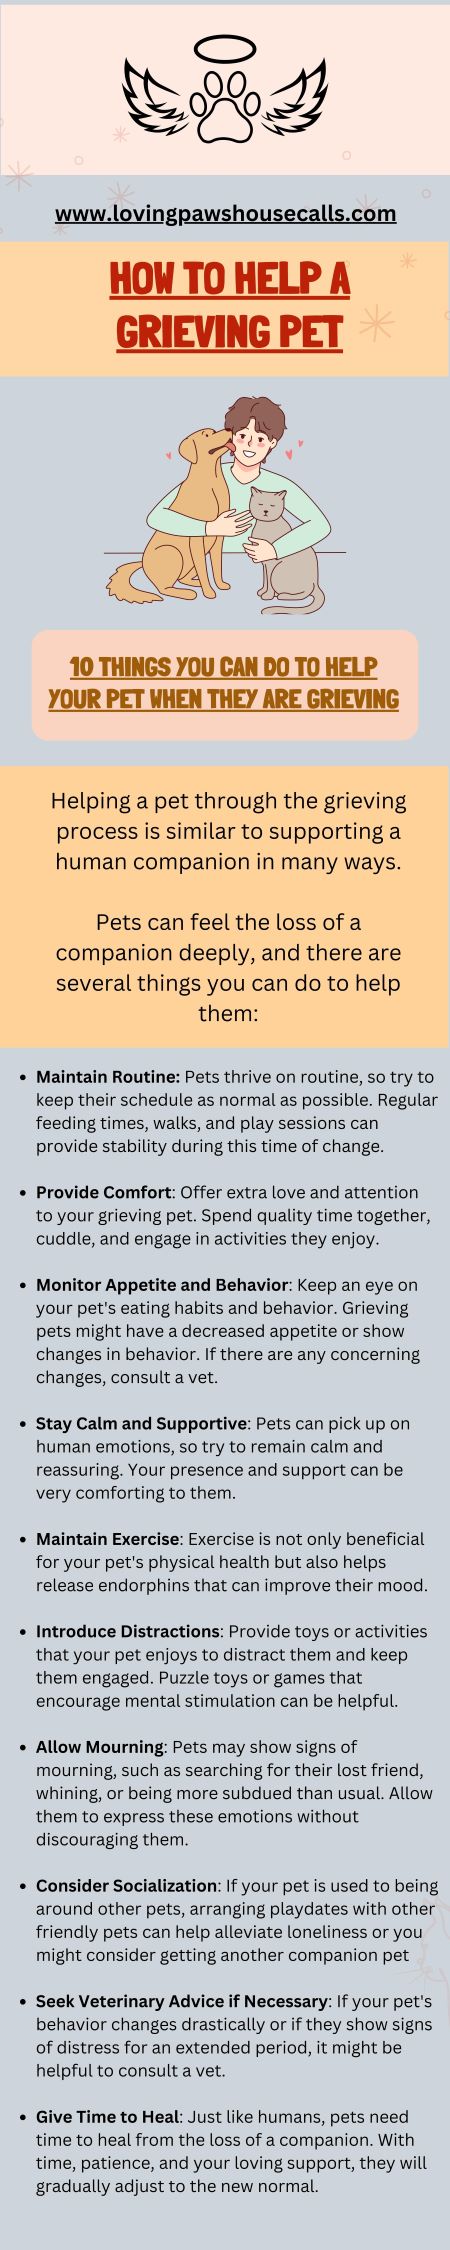 Infographic explaining 10 things you Can do to help your pet When they are Grieving